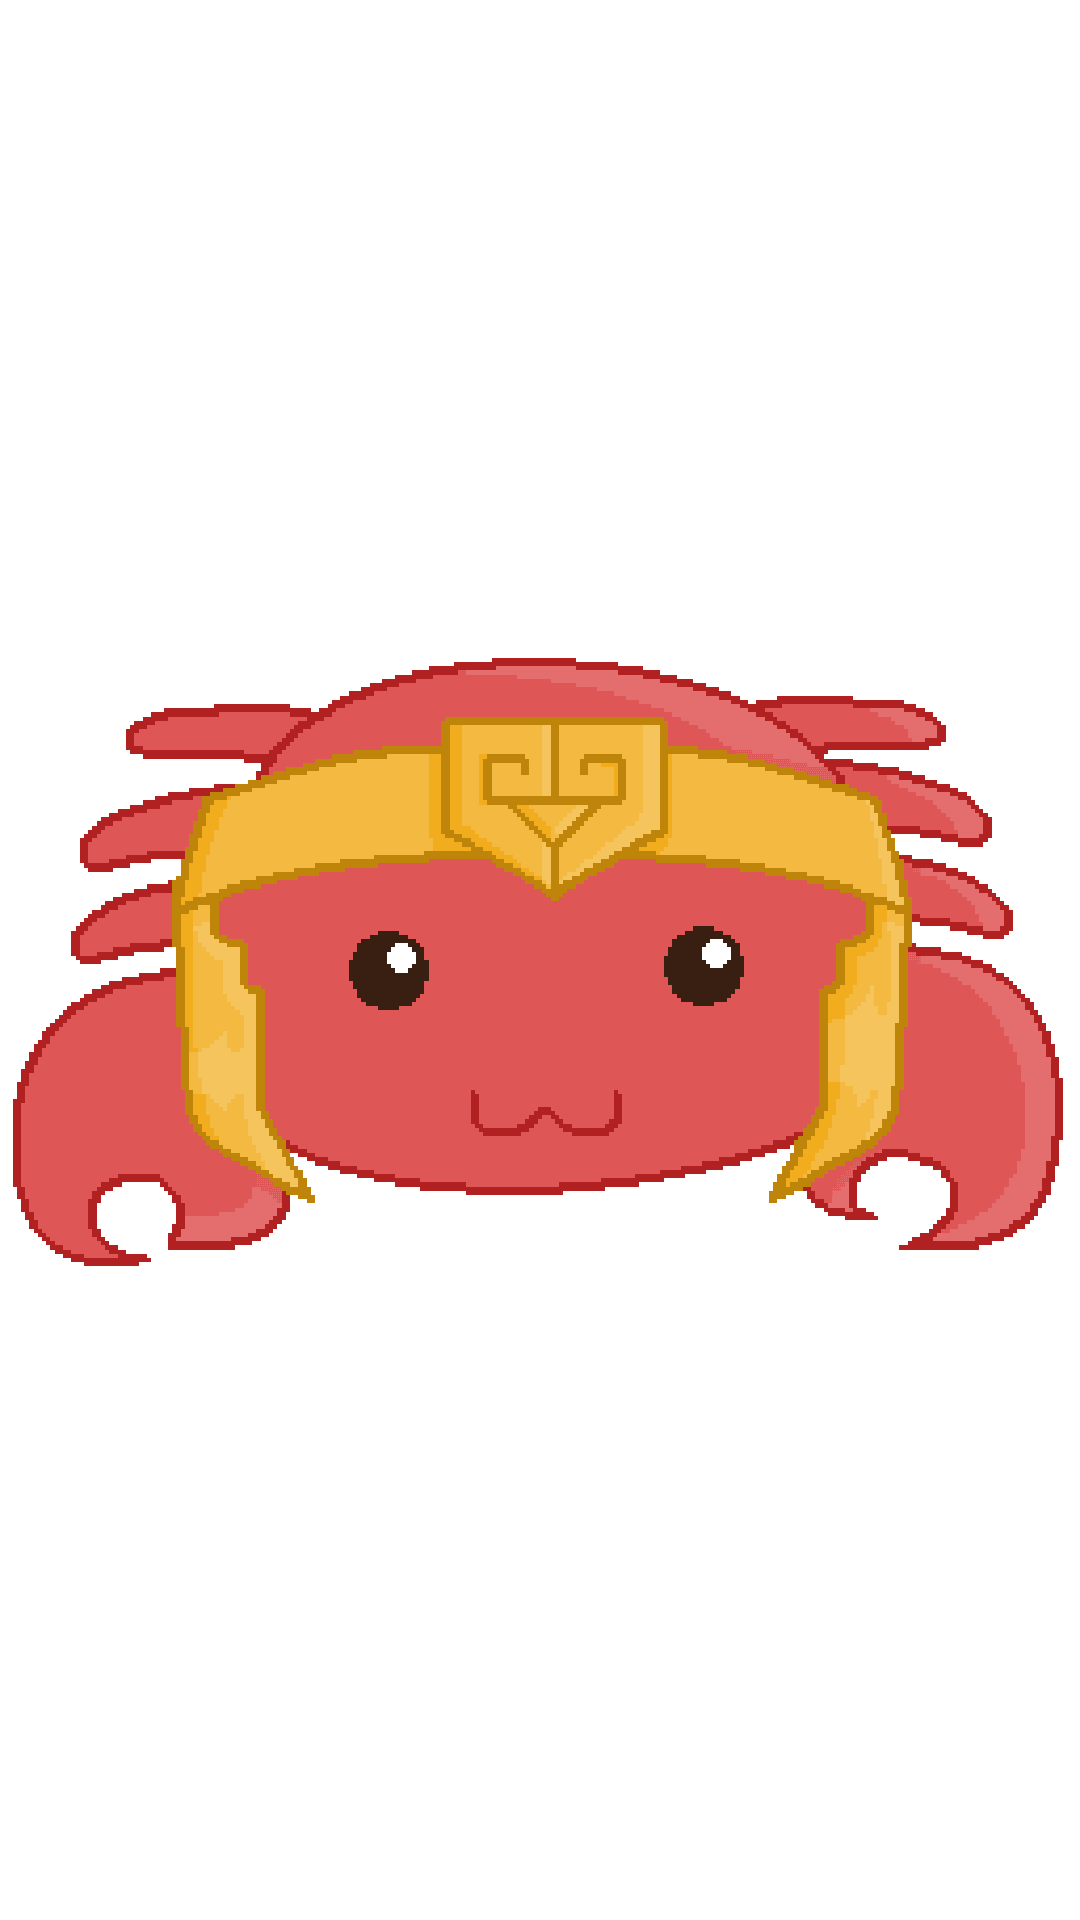 crabs clipart animated gif